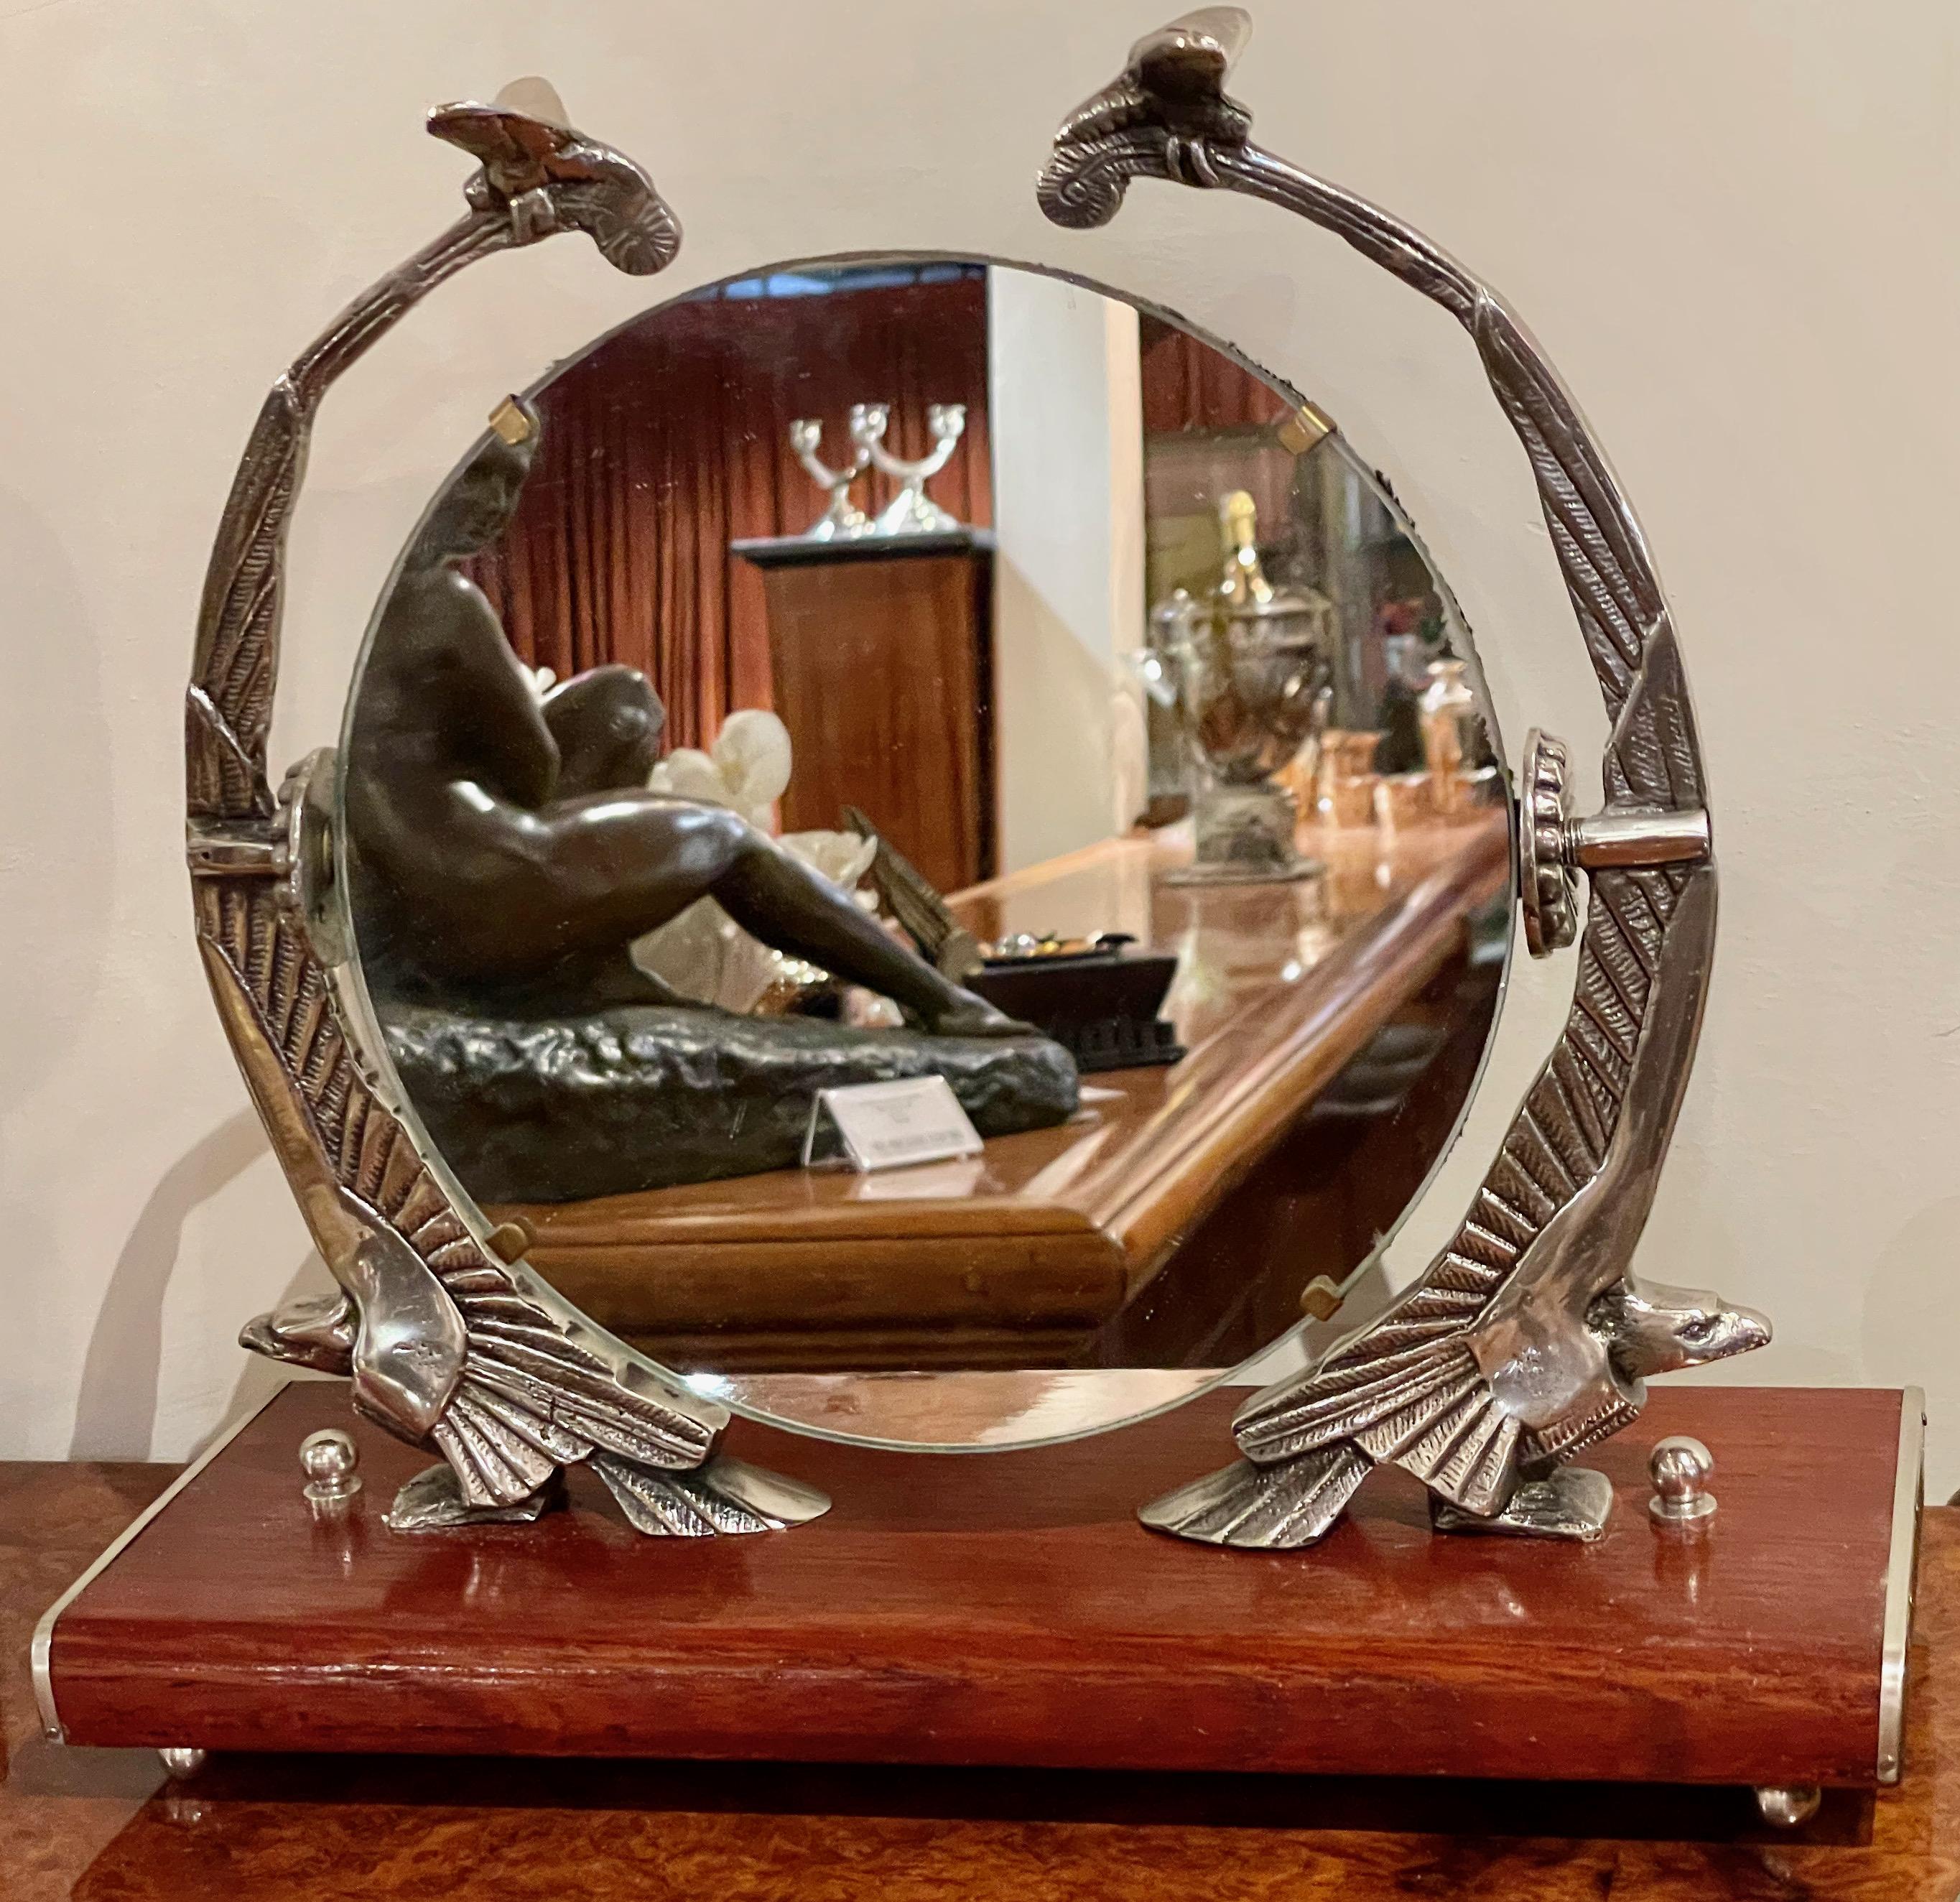 Art Deco mirror with Eagle sculpture supports on a wooden base. Unique cast metal sculpture gives this decorative vanity style mirror not only limitless possibilities for placement in your home but reflects much more than this circular mirror. The